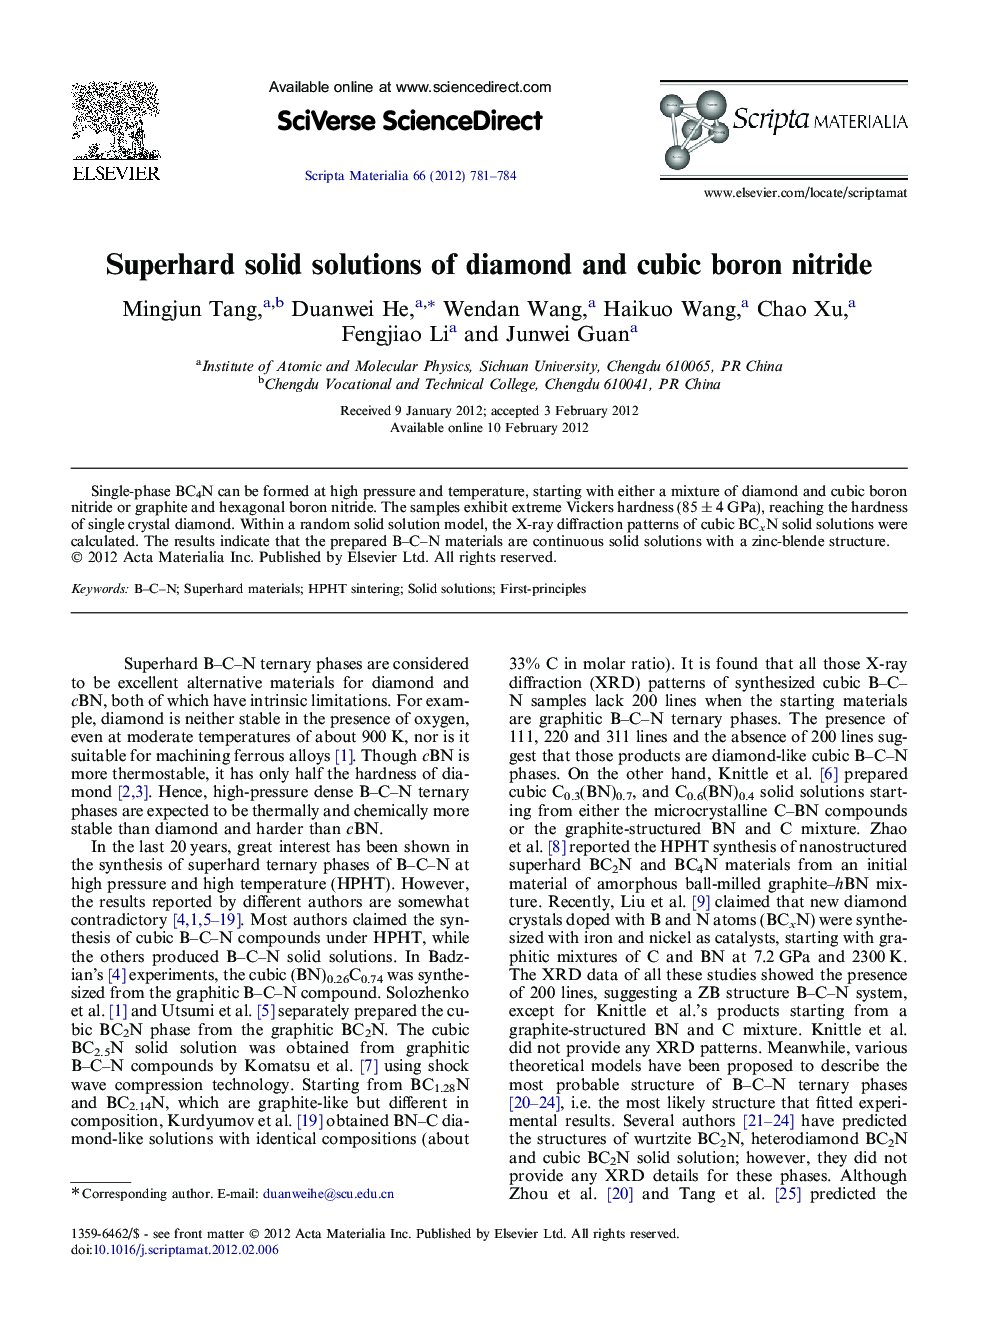 Superhard solid solutions of diamond and cubic boron nitride